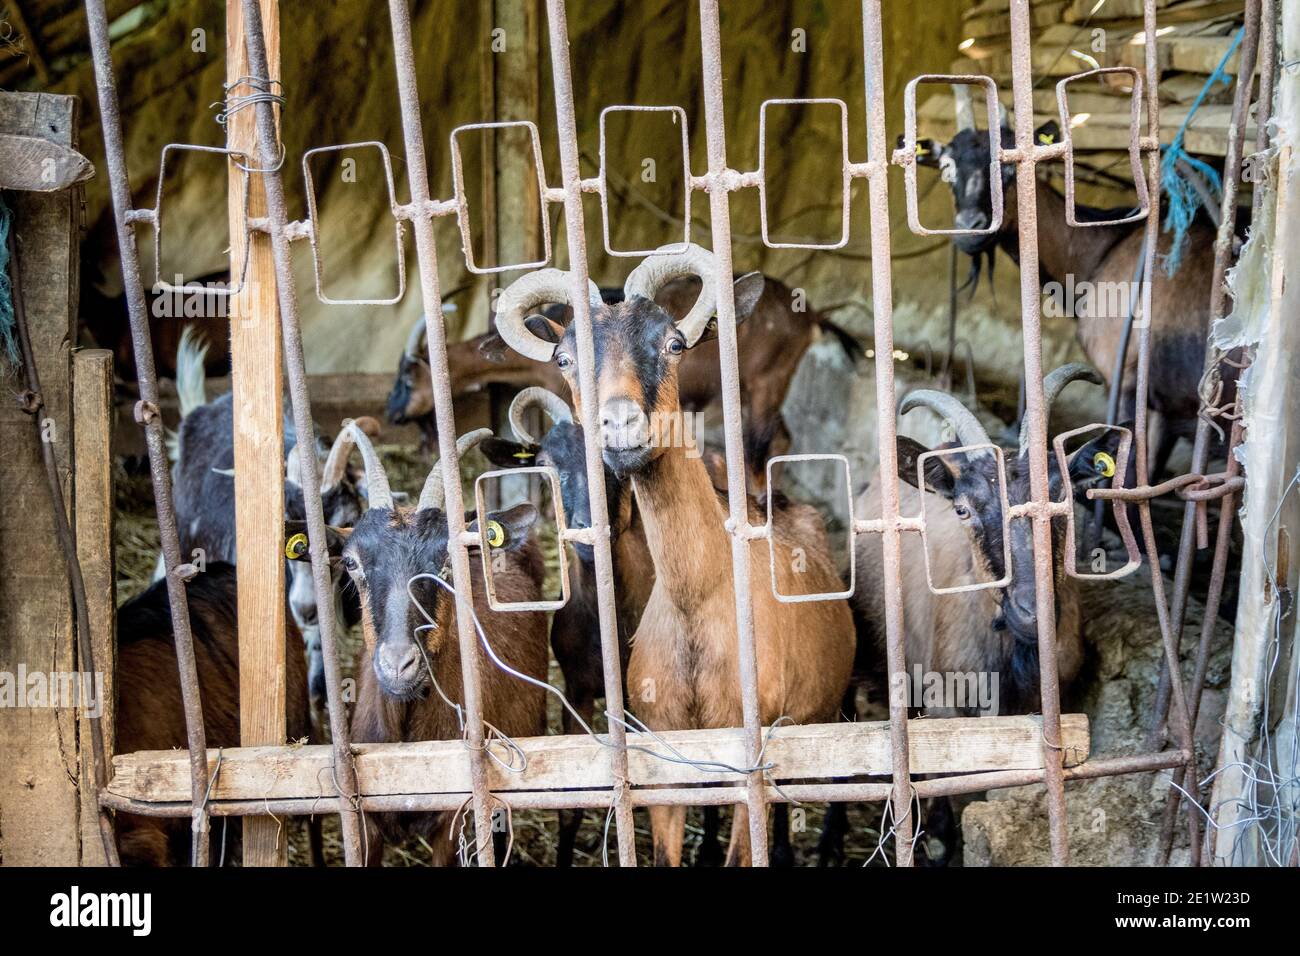 Curious goats waiting for feed in a repurposed nuclear shelter, Albania. Communist-era bunkers were built by dictator Enver Hoxha during the Cold War. Stock Photo